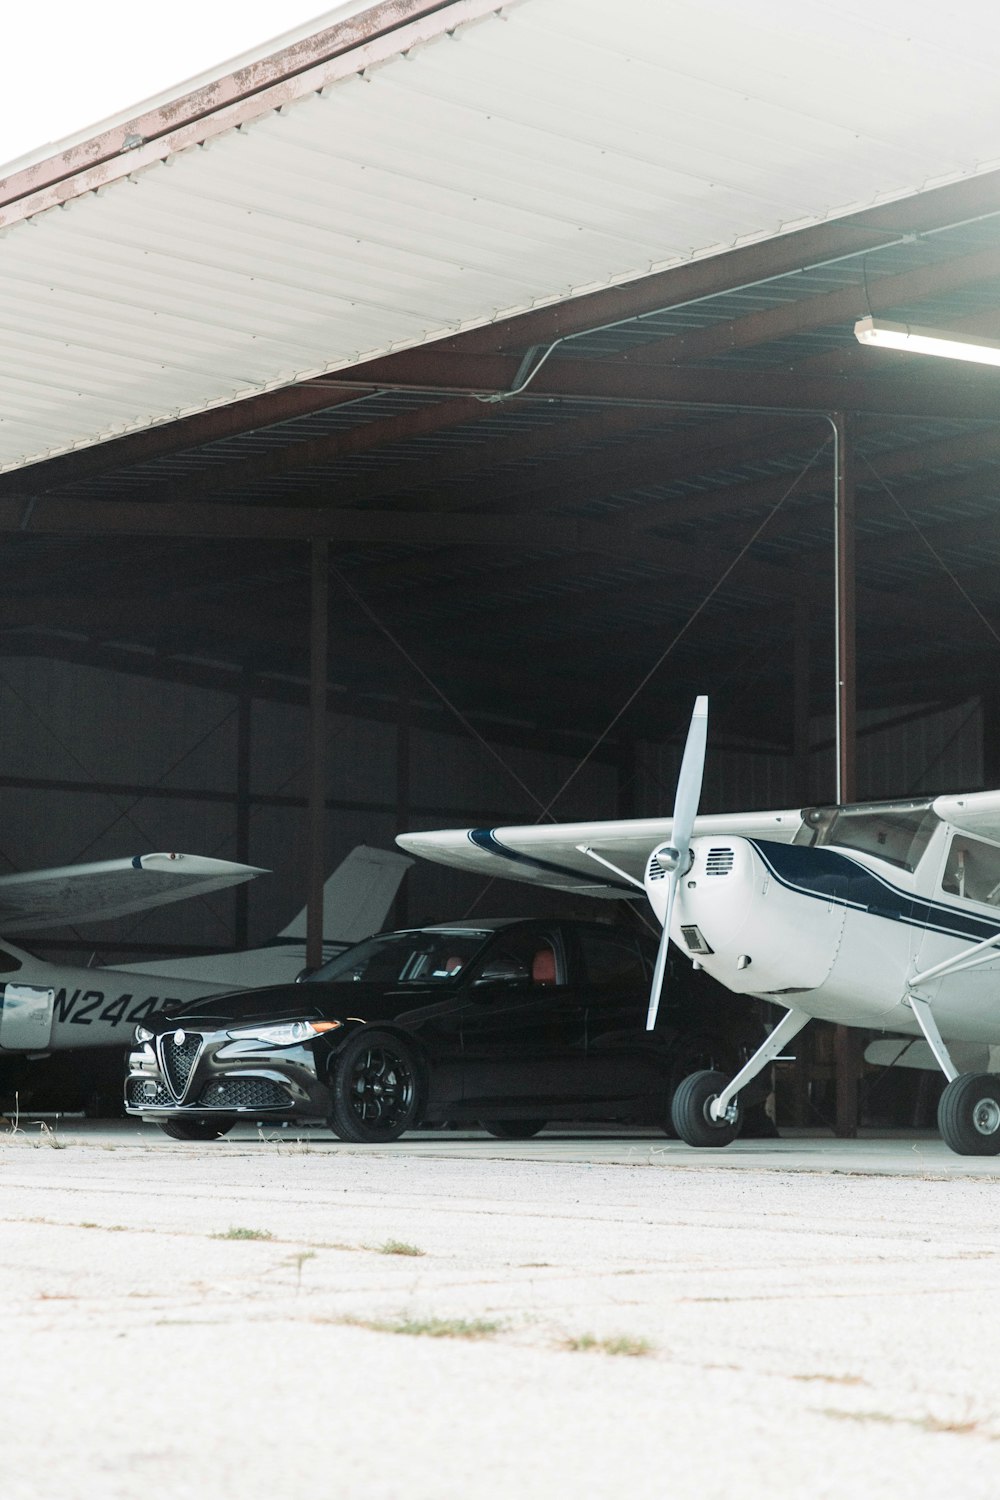 a small airplane parked in a garage next to a car